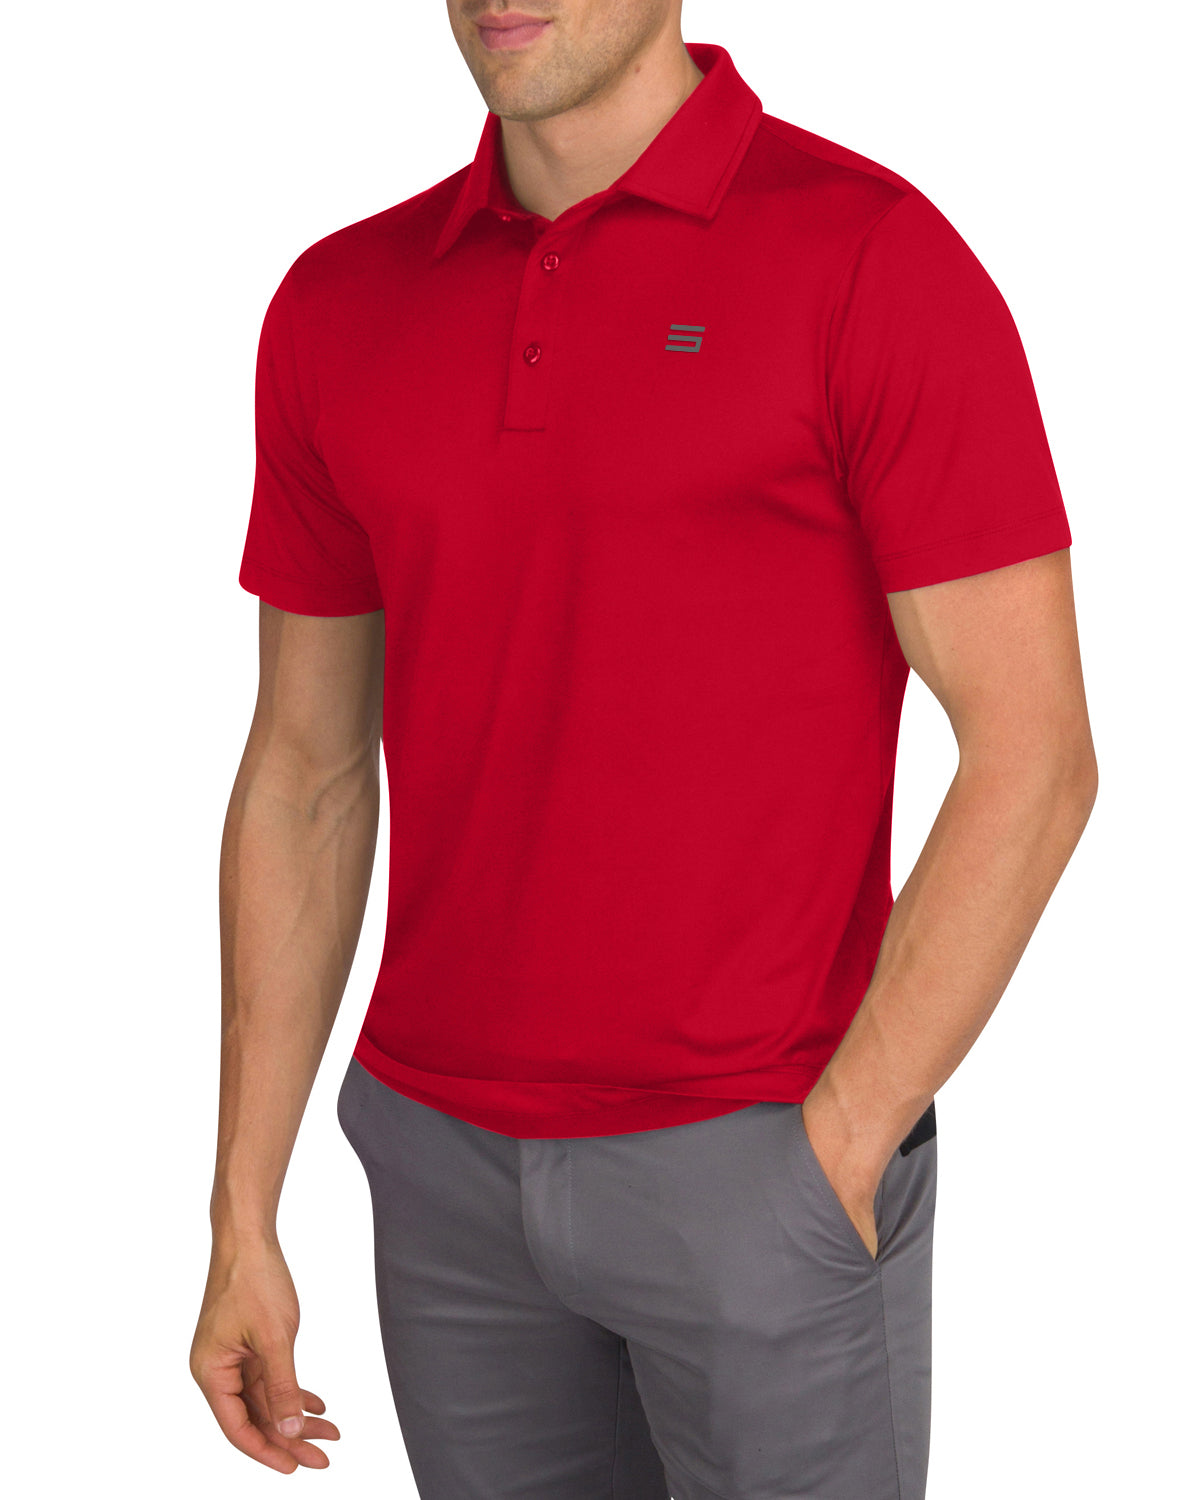 Men's Untucked Golf Polo - The Perfect Length